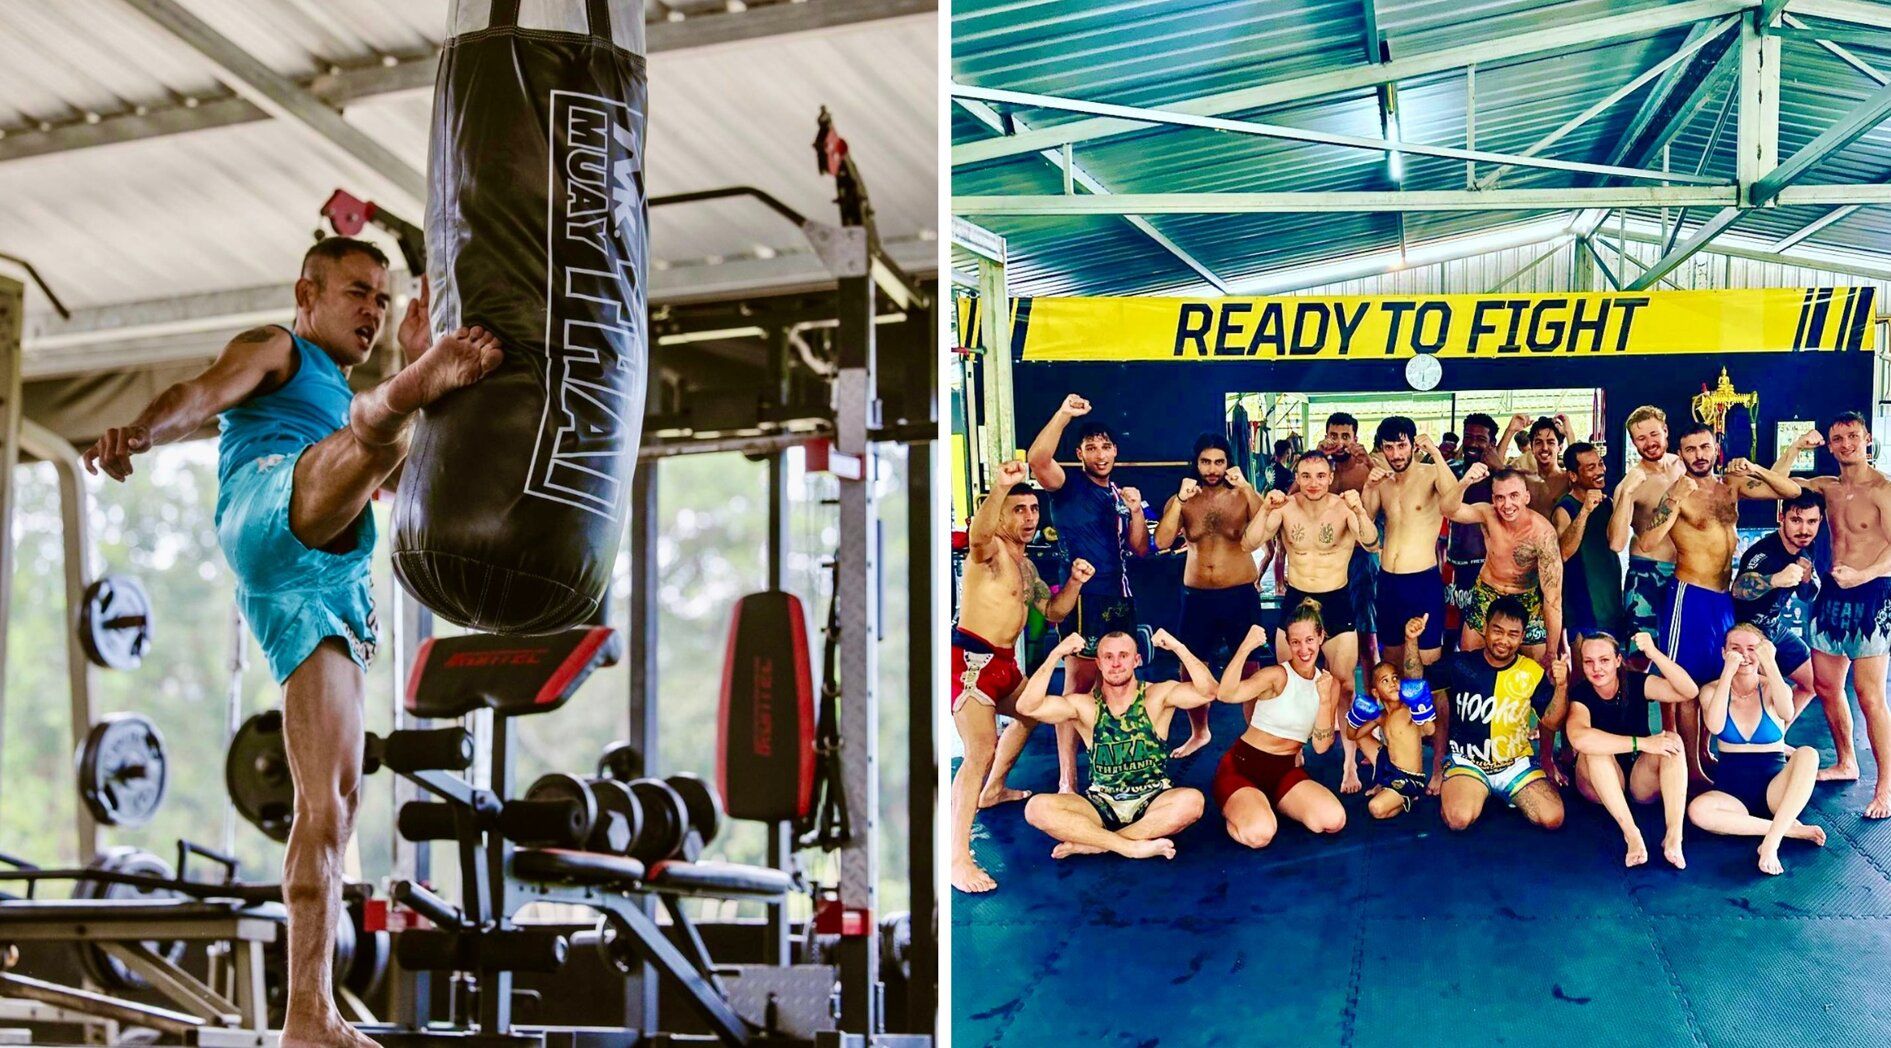 M19 Muay Thai caters to both seasoned fighters and beginners.